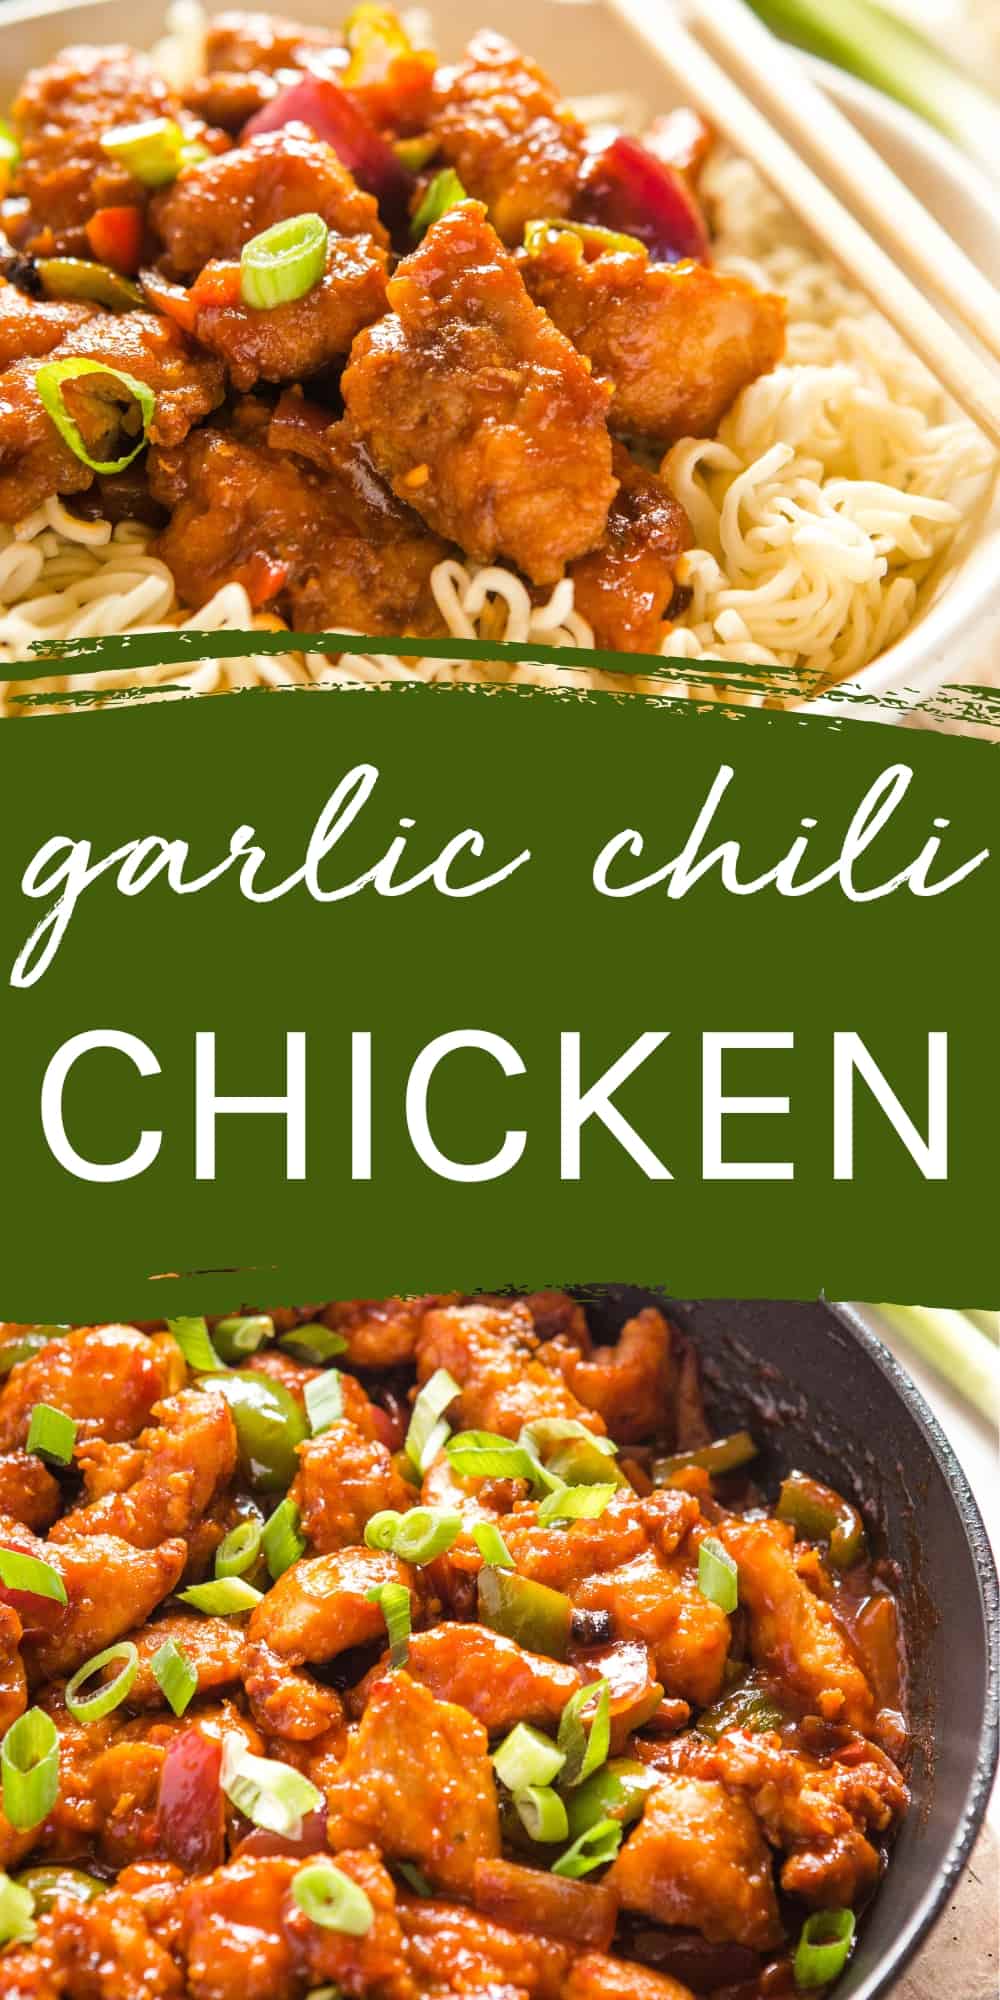 This Spicy Chicken with Garlic and Chili recipe is easy to make with crispy chicken, sautéed veggies & a sweet Asian-inspired sauce. Recipe from thebusybaker.ca! #spicychicken #garlicchicken #chilichicken #asianchicken #asianrecipe #chinesefood #takeoutrecipe #easydinner #easymeal #mealprep #mealplanning via @busybakerblog